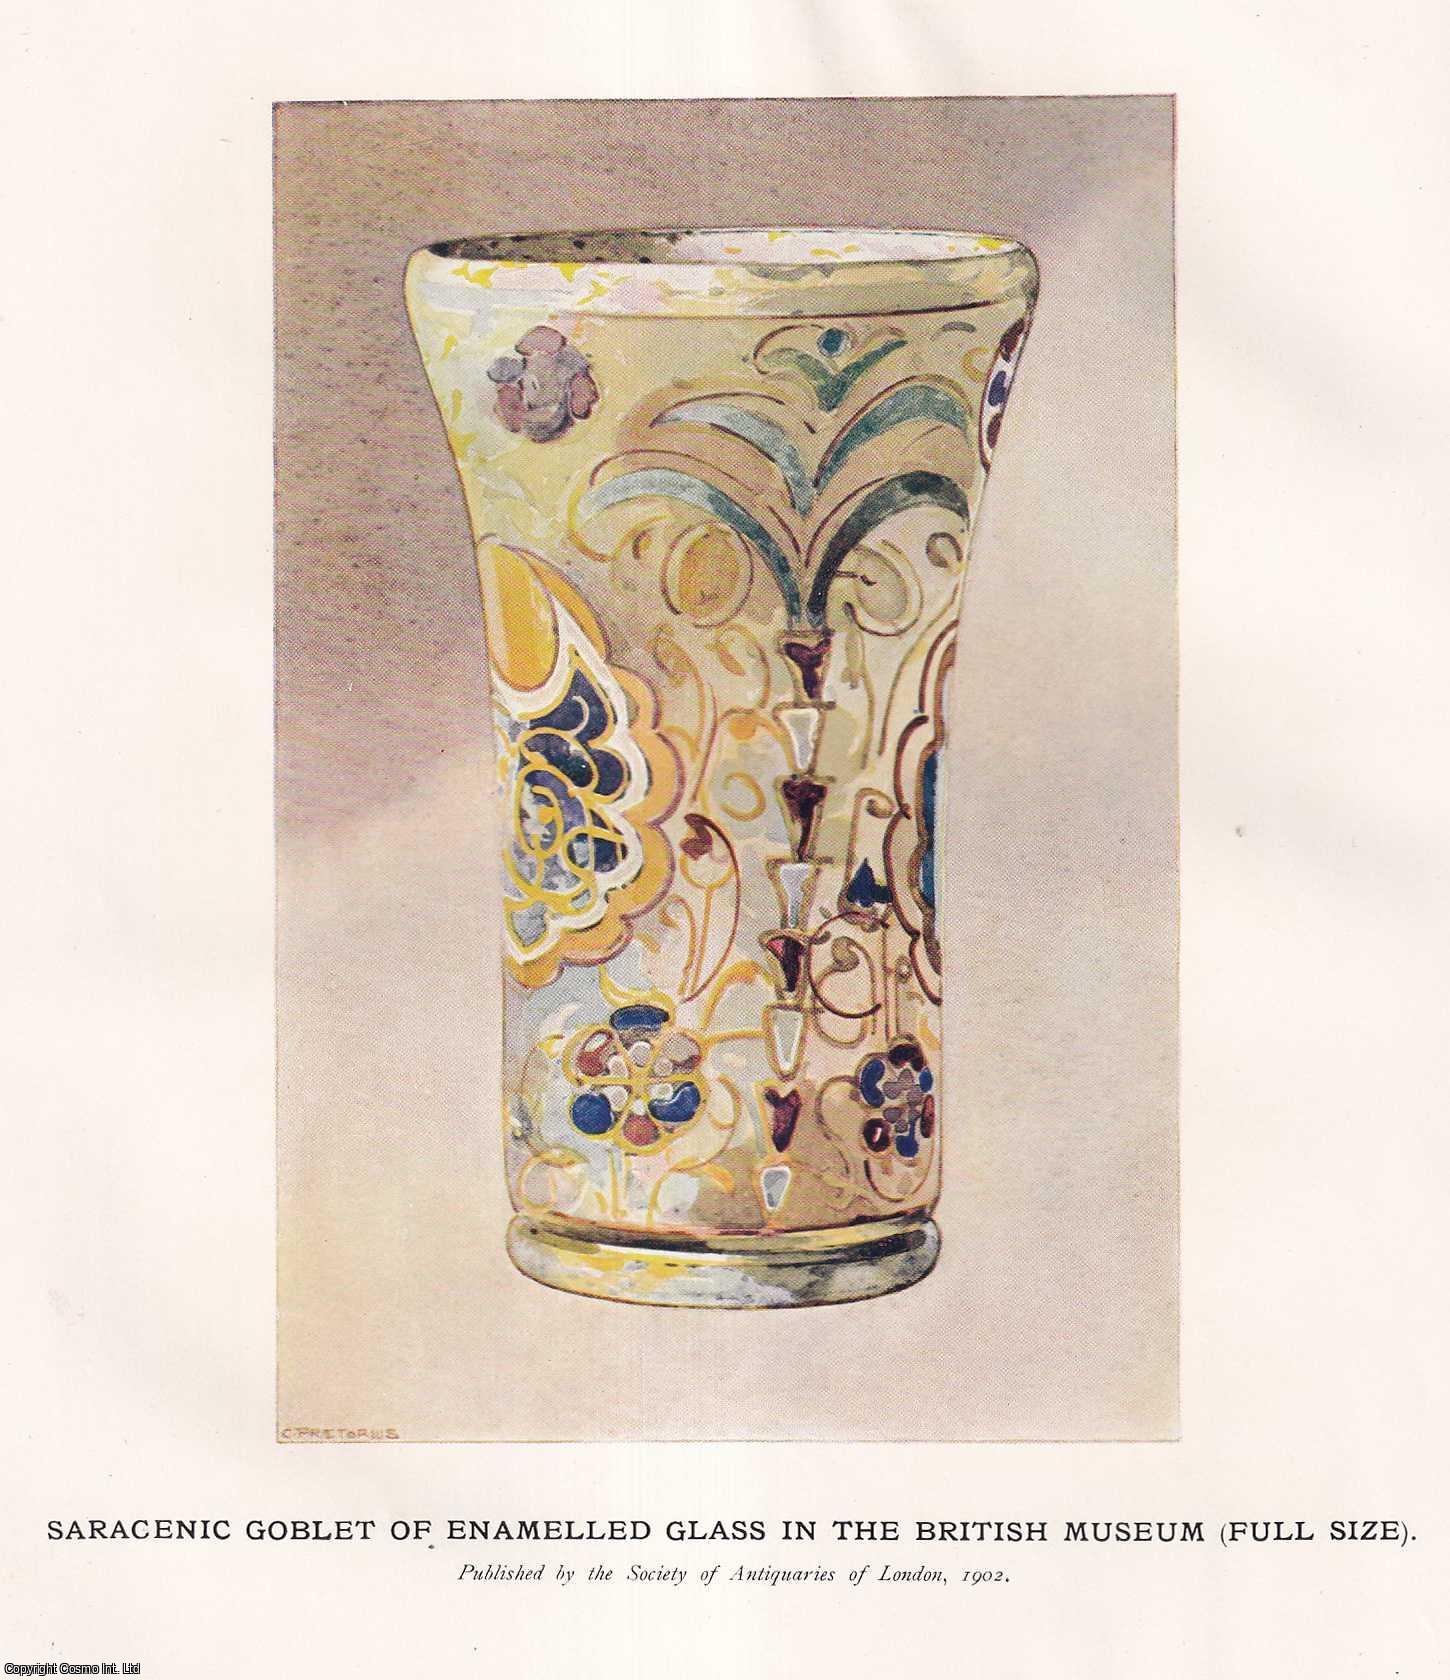 Charles Hercules Read, Esq. - On a Saracenic Goblet of Enamelled Glass of medieval date. An uncommon original article from the journal Archaeologia, 1902.